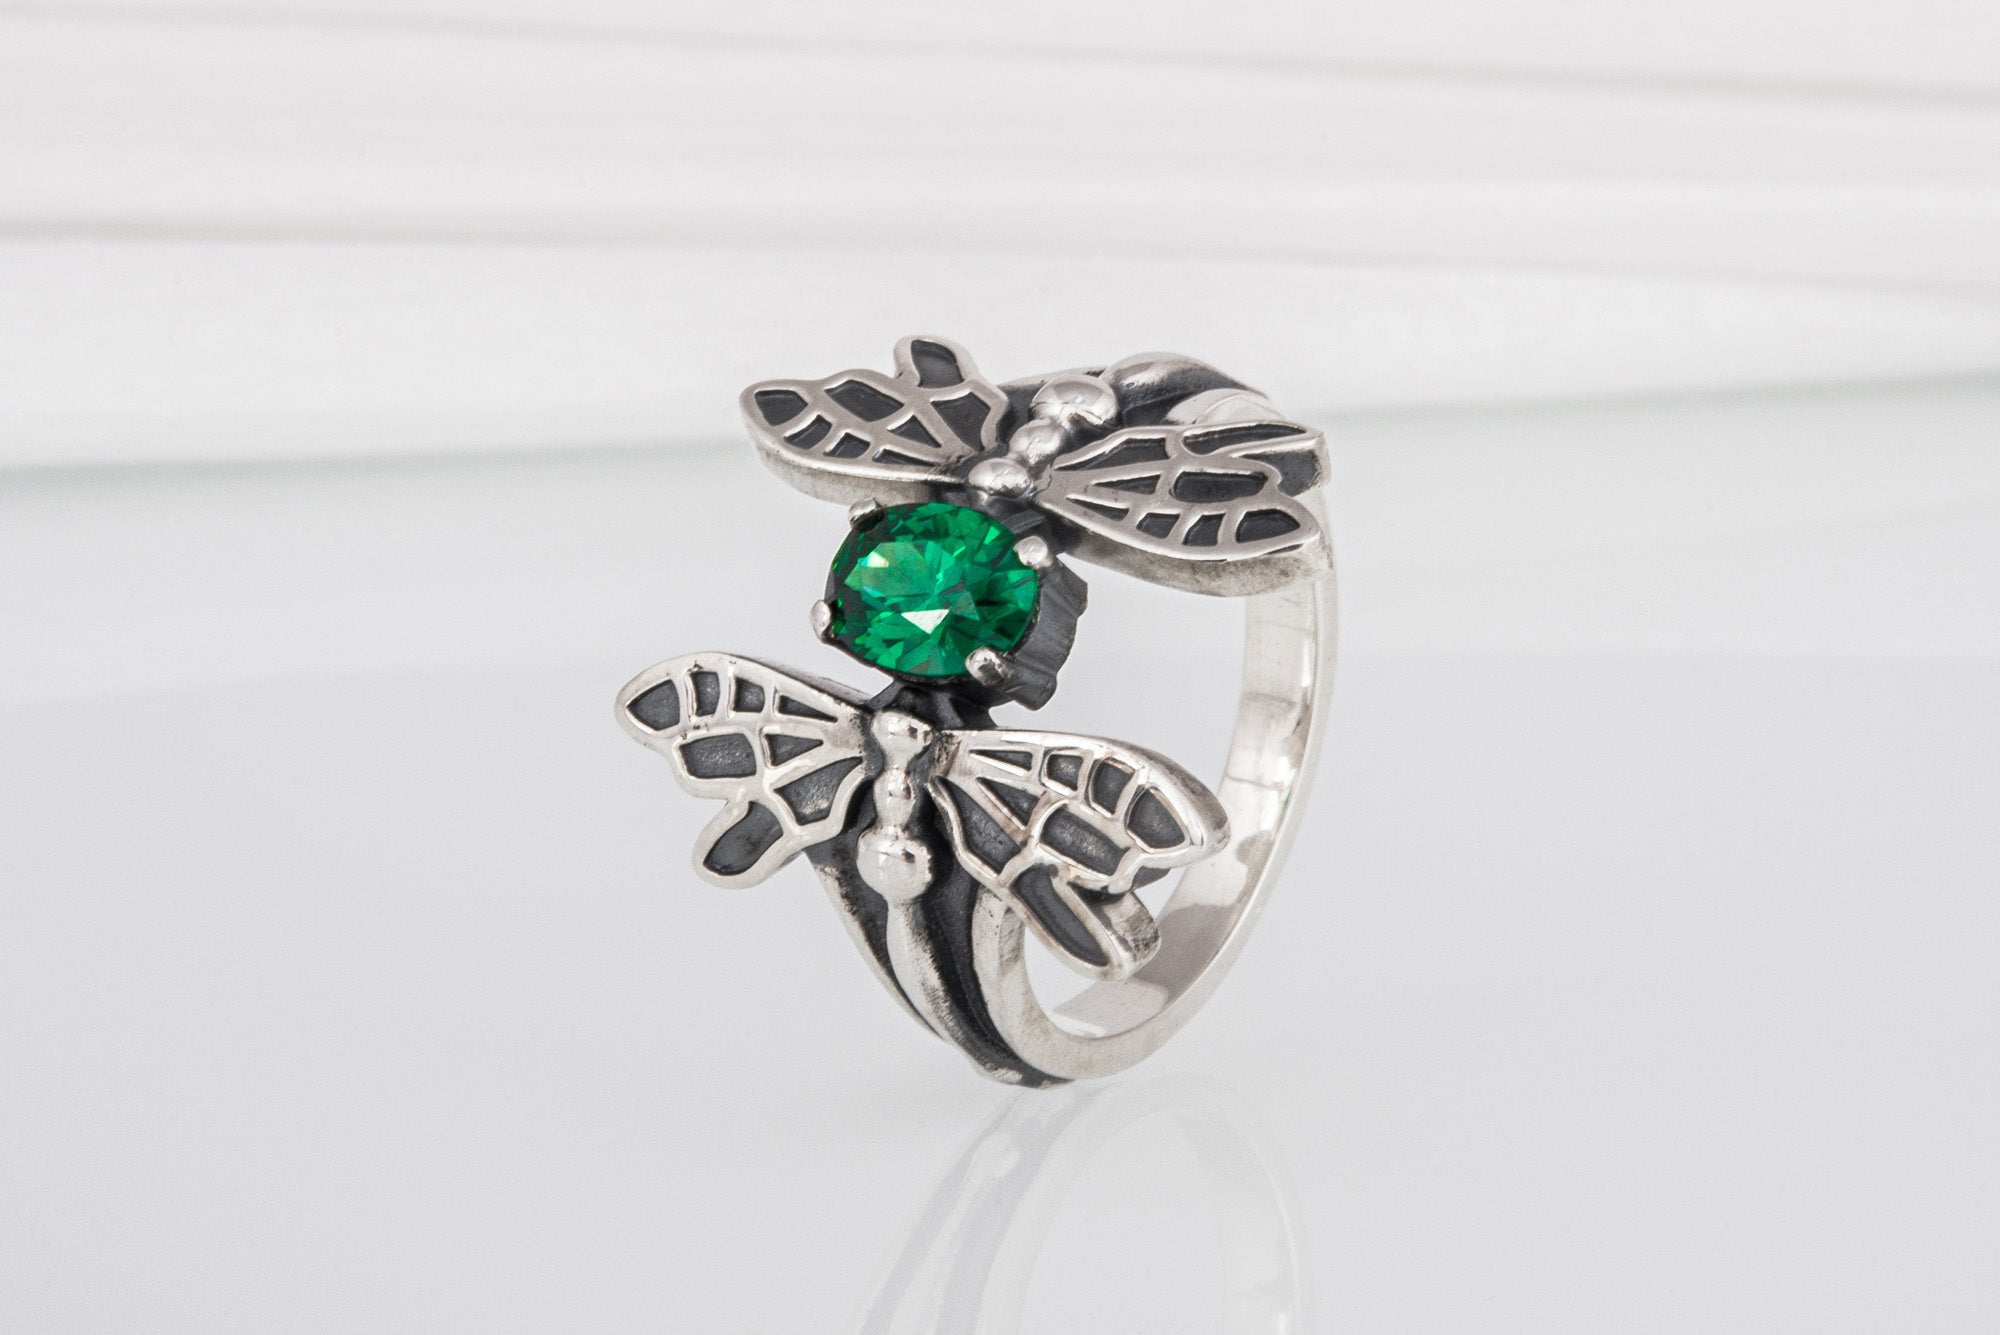 Unique 925 Silver Dragonfly Ring With Green Gem, Handcrafted Jewelry - vikingworkshop